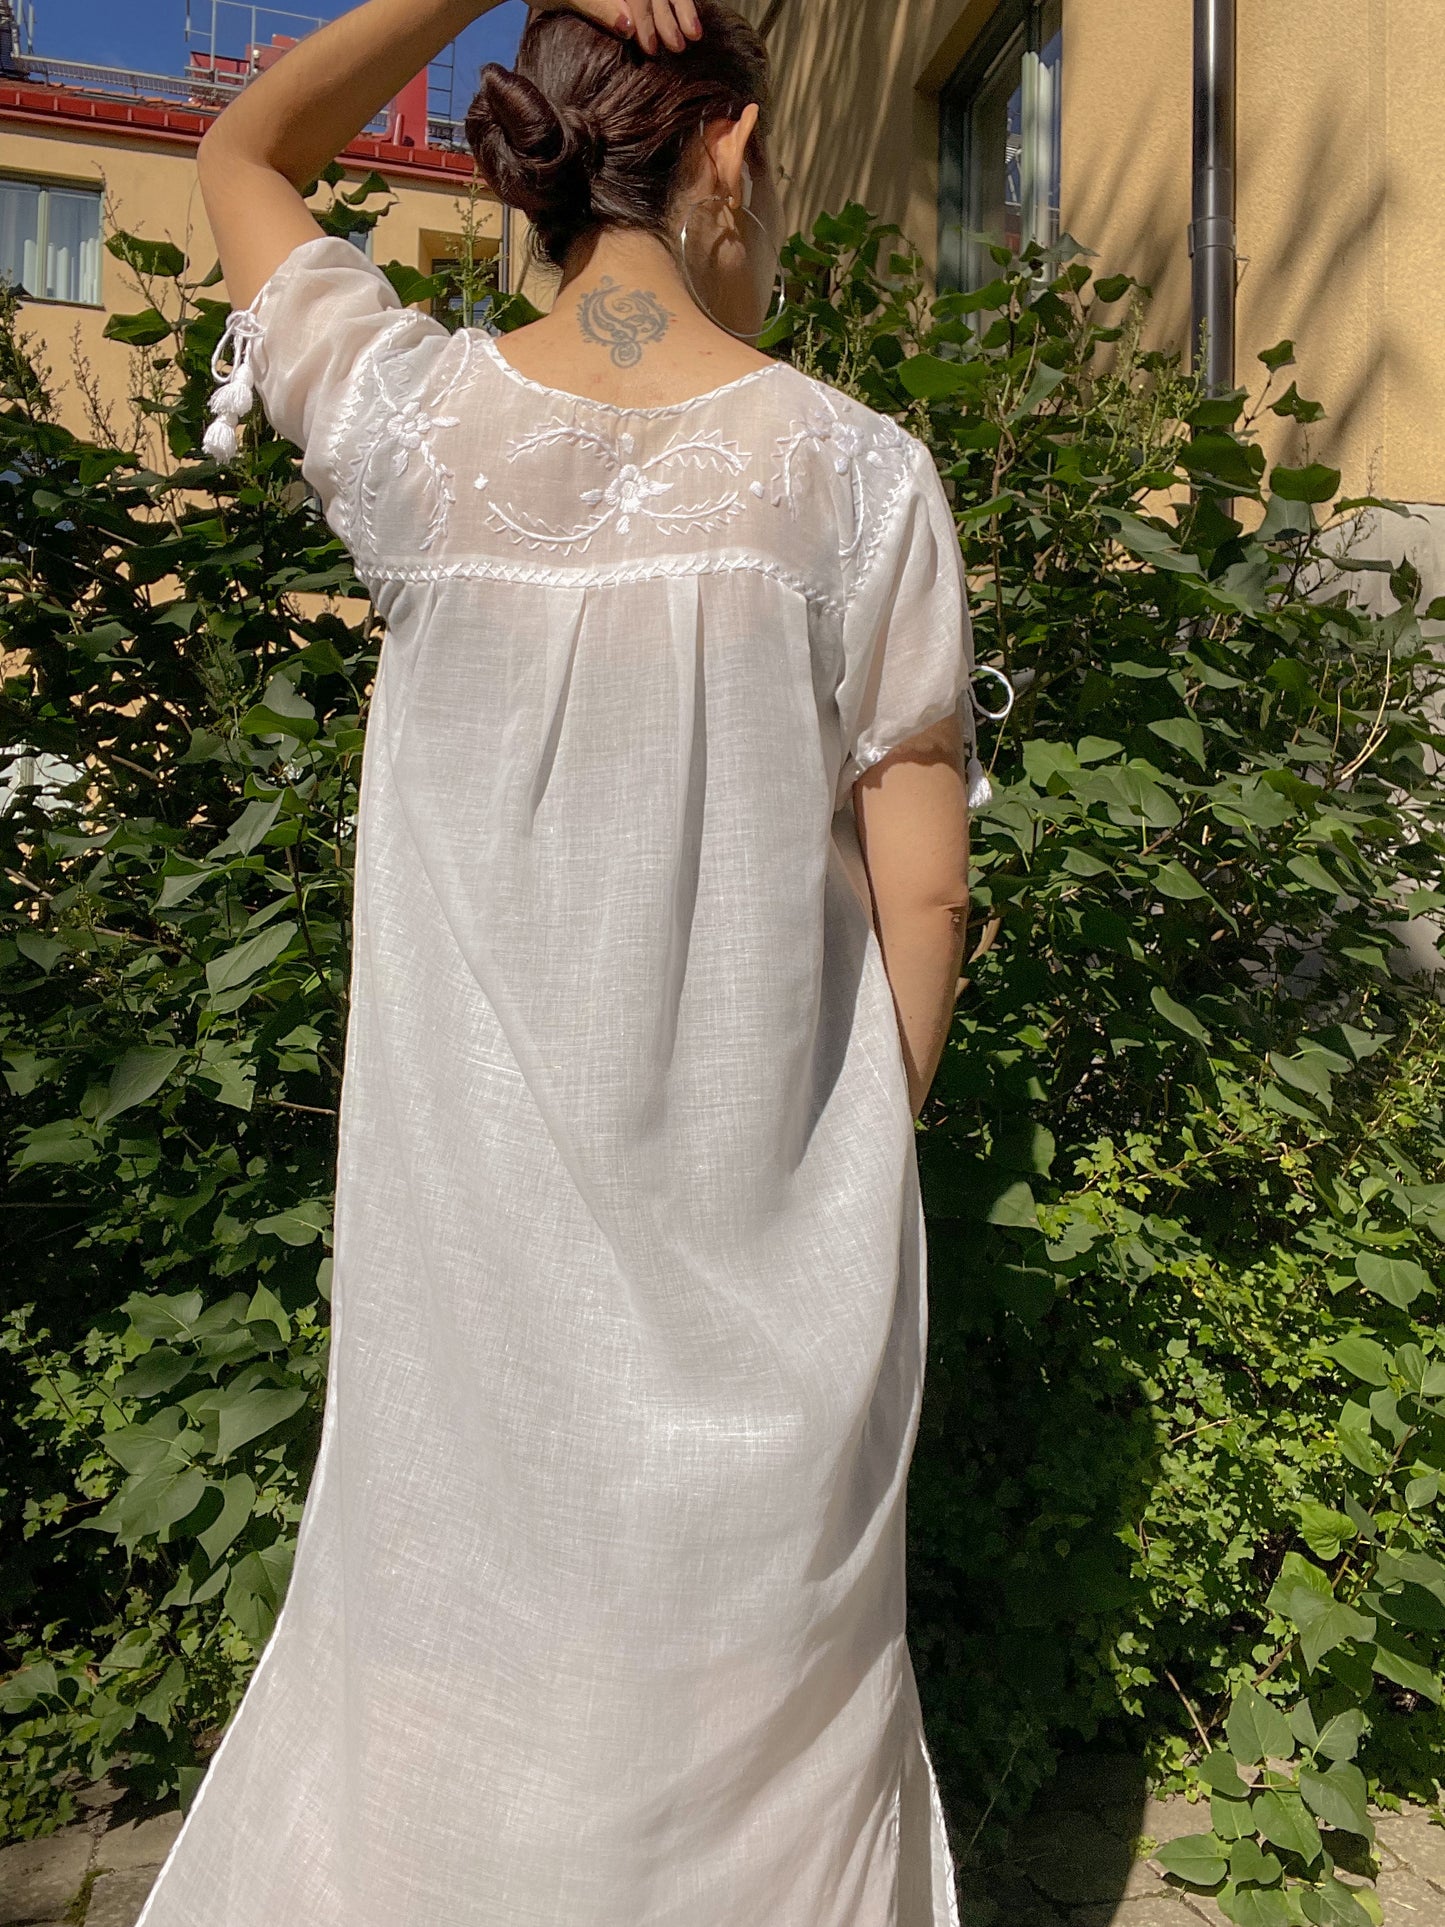 Vintage Embroidered Mexican Cotton Nightgown